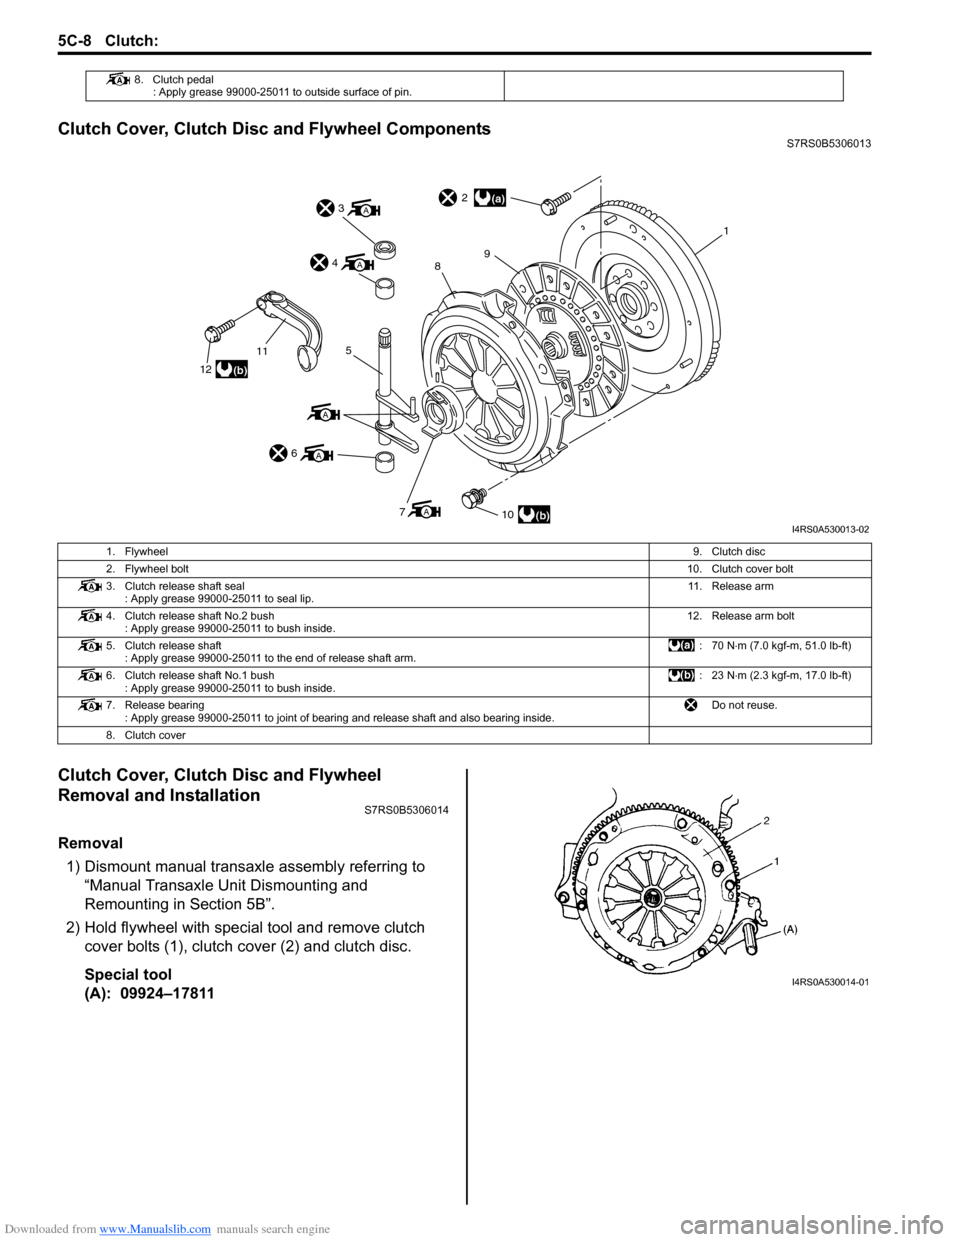 SUZUKI SWIFT 2008 2.G Service Workshop Manual Downloaded from www.Manualslib.com manuals search engine 5C-8 Clutch: 
Clutch Cover, Clutch Disc and Flywheel ComponentsS7RS0B5306013
Clutch Cover, Clutch Disc and Flywheel 
Removal and Installation
S